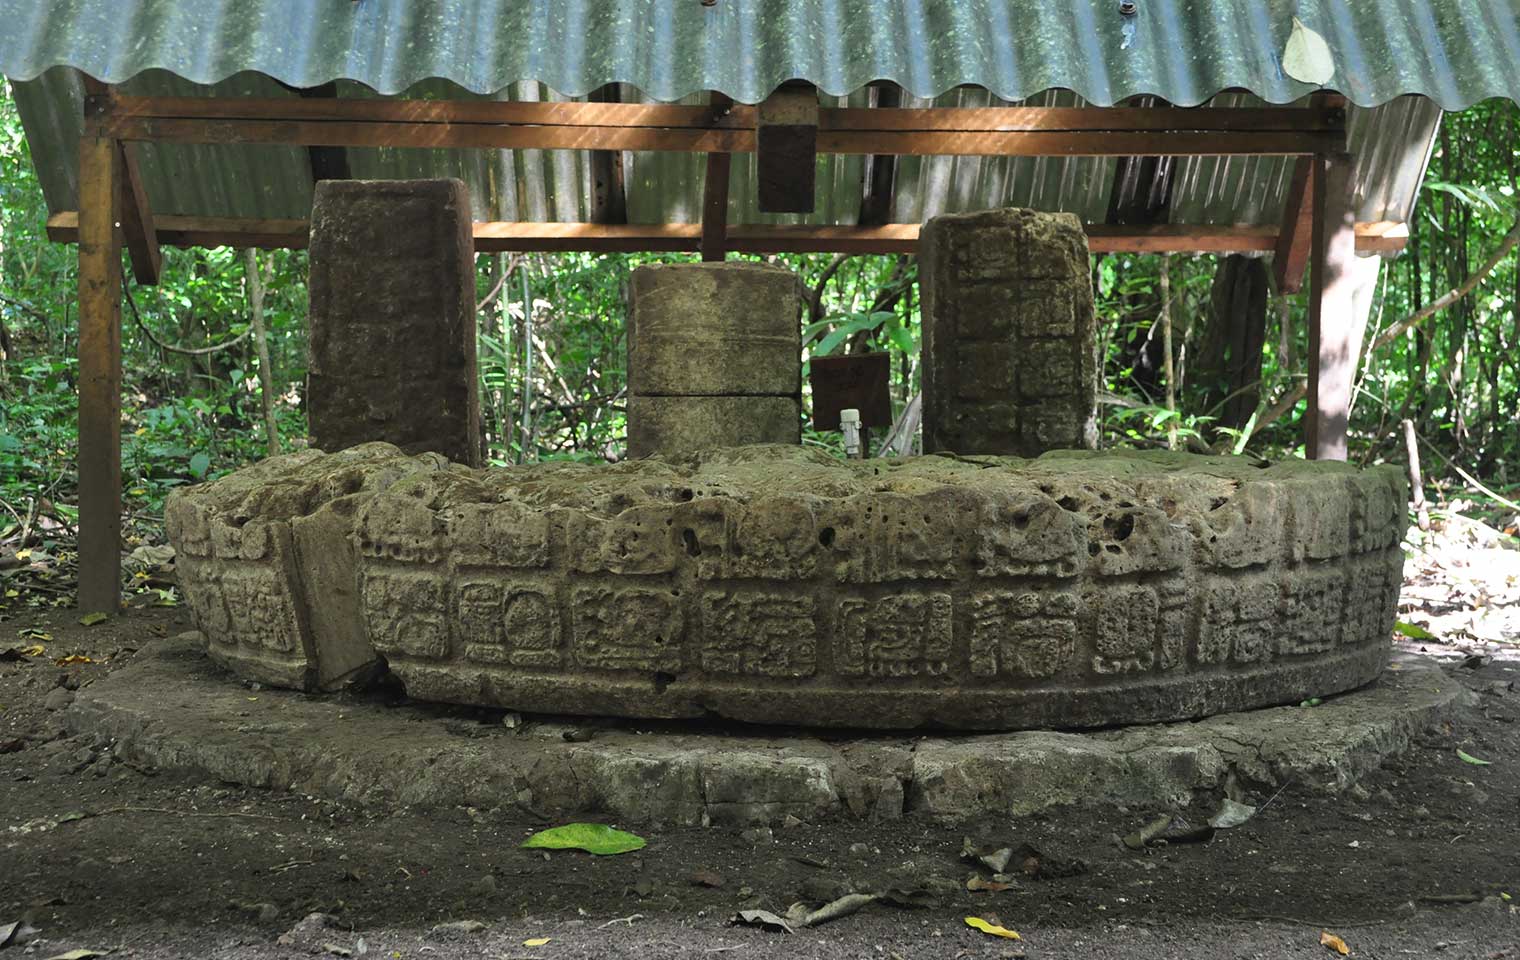 Long horizontal engraved altar stone lying under a protective tent